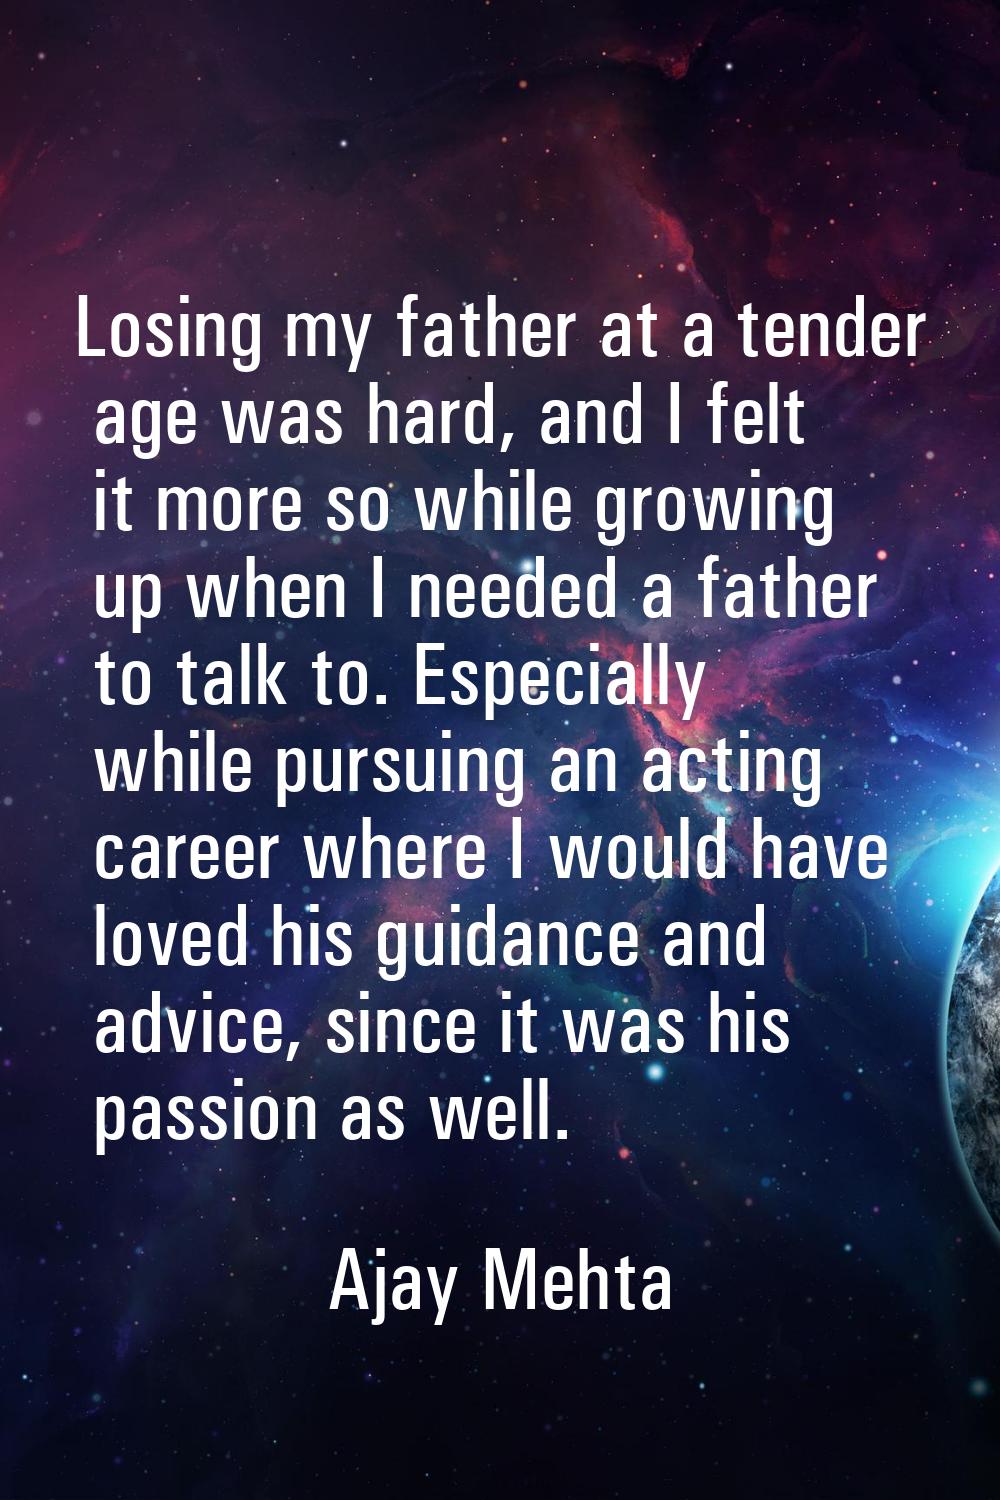 Losing my father at a tender age was hard, and I felt it more so while growing up when I needed a f